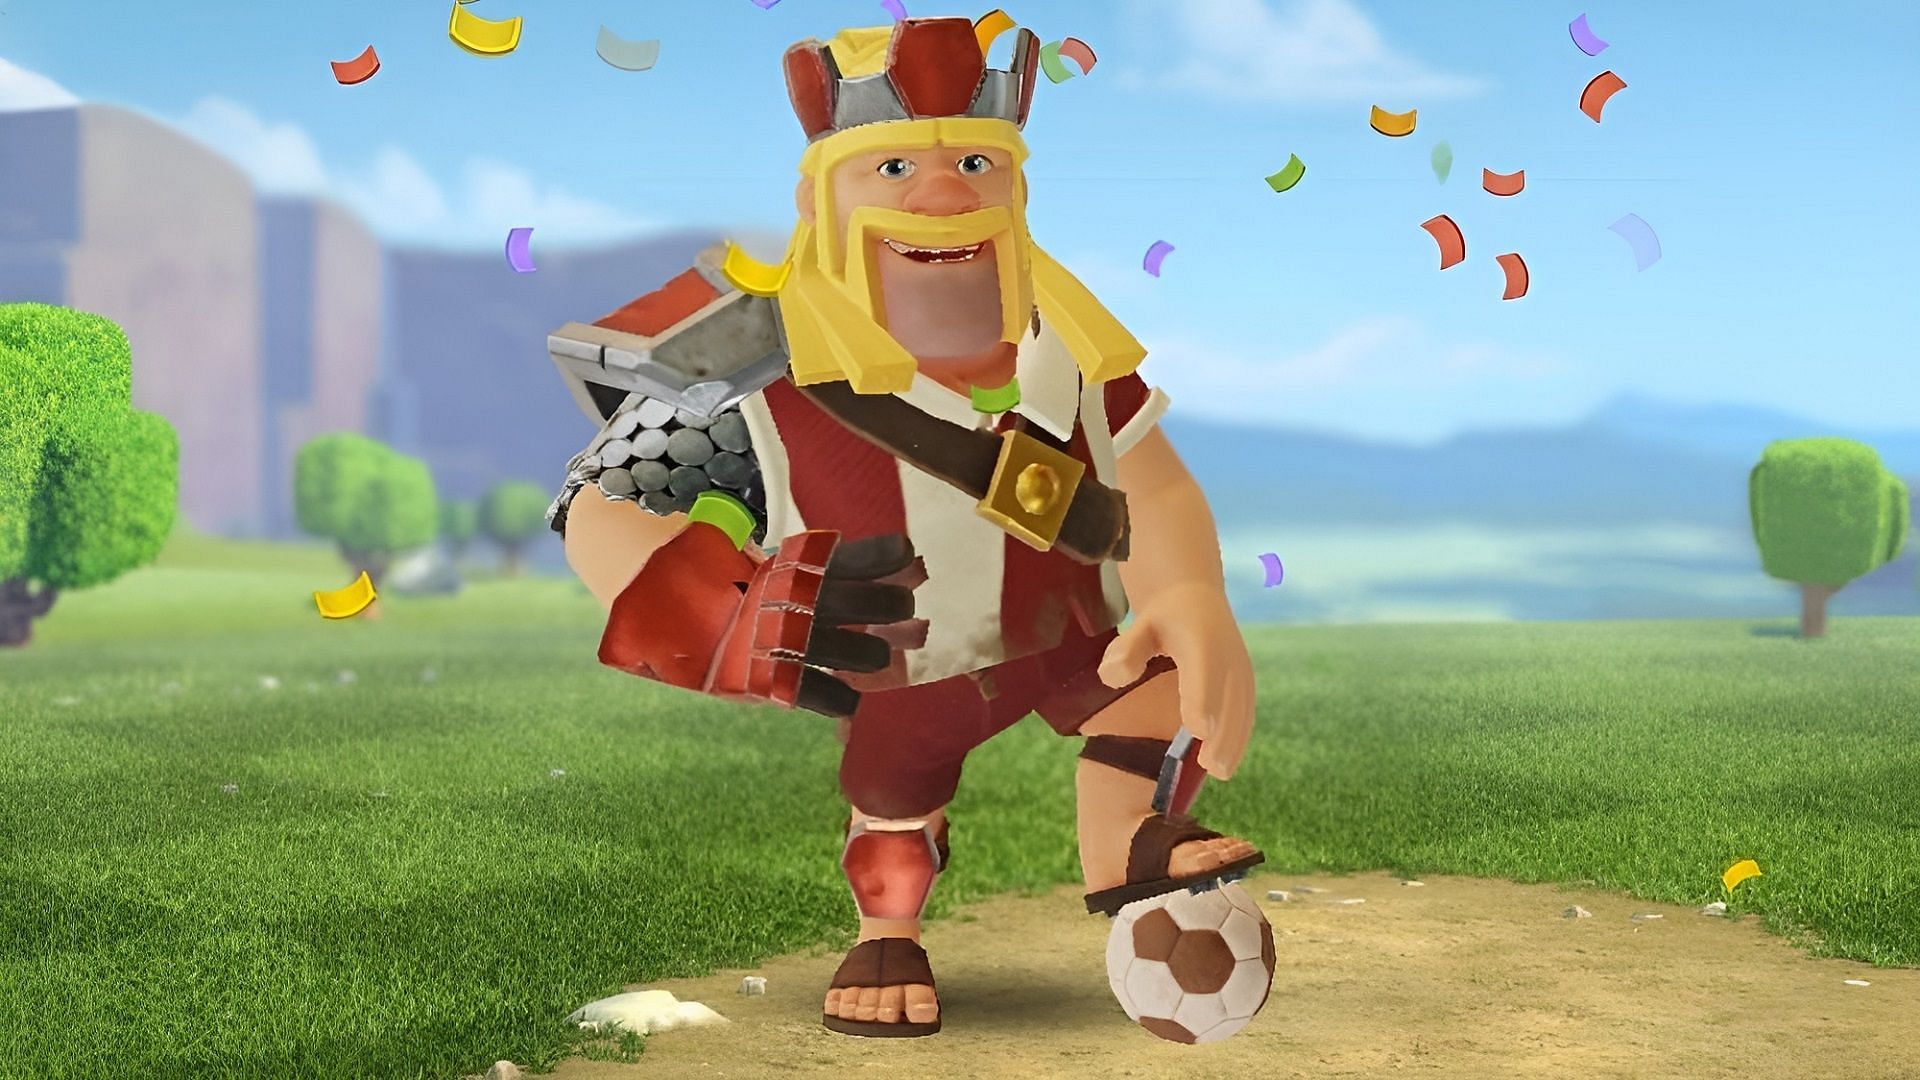 Football King is one of the latest Hero skins in Clash of Clans (Image via Supercell)